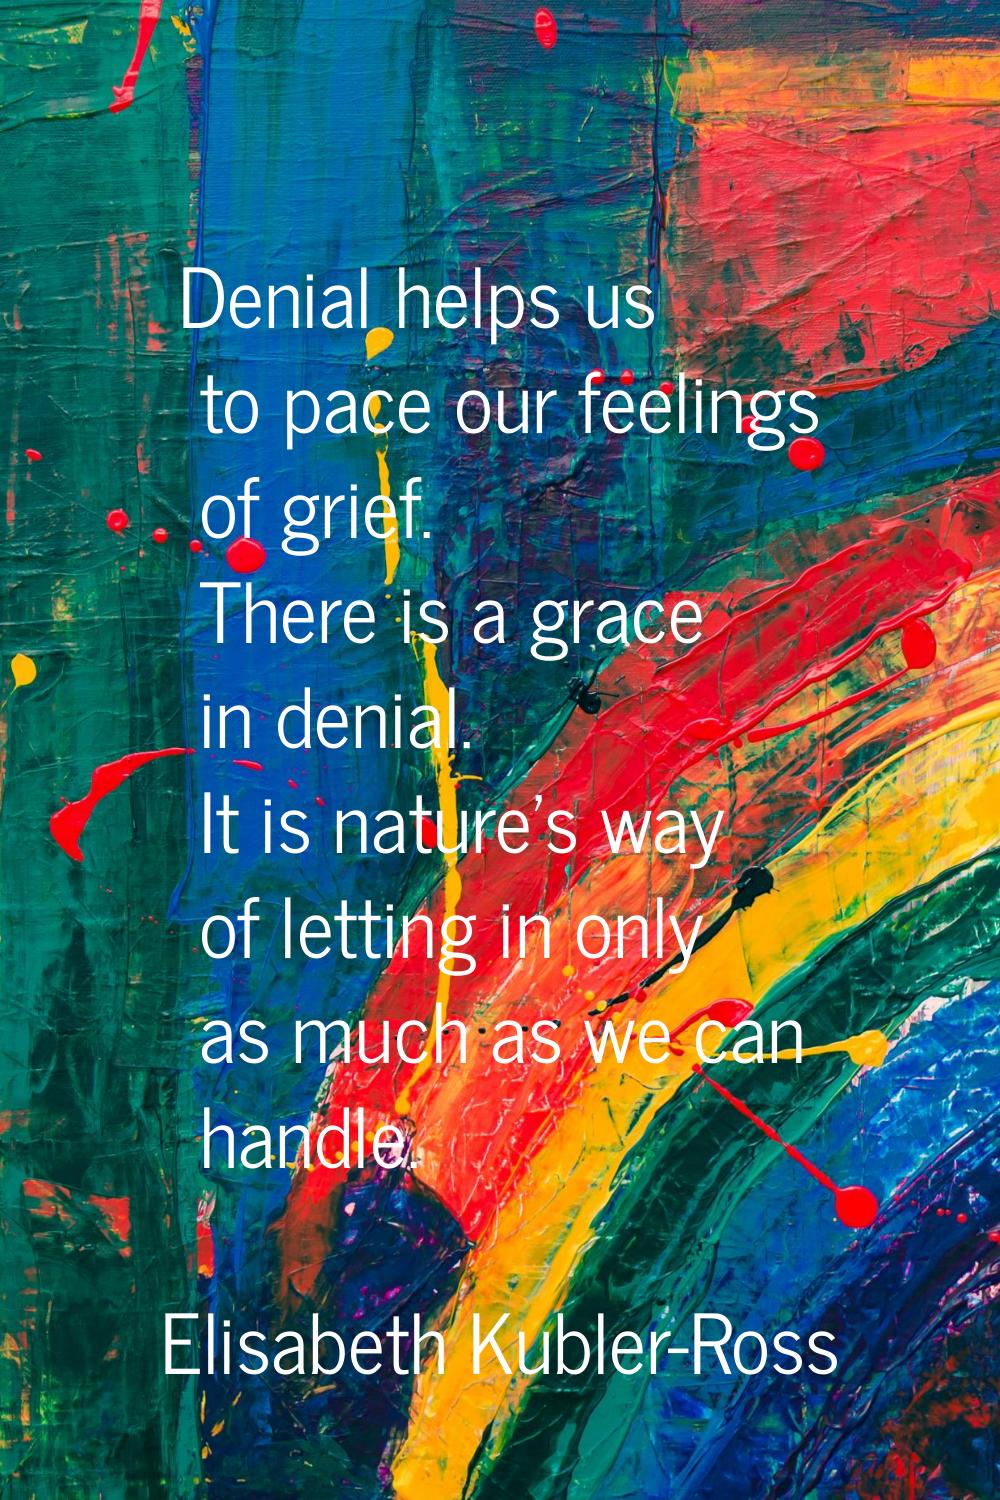 Denial helps us to pace our feelings of grief. There is a grace in denial. It is nature's way of le